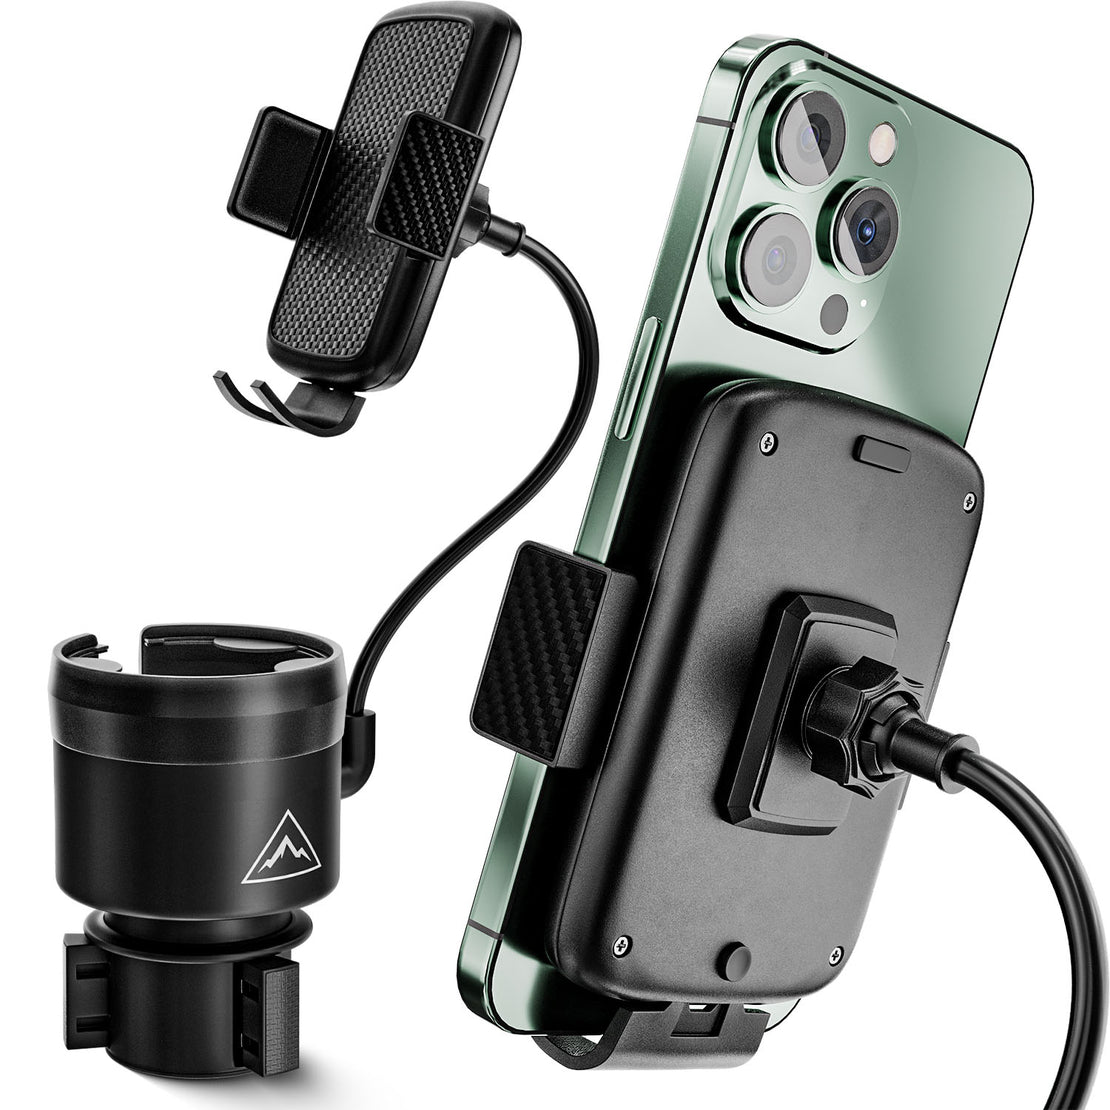 Hydro Expander™ with Phone Mount - Expandable Cup Holder up to 3.8